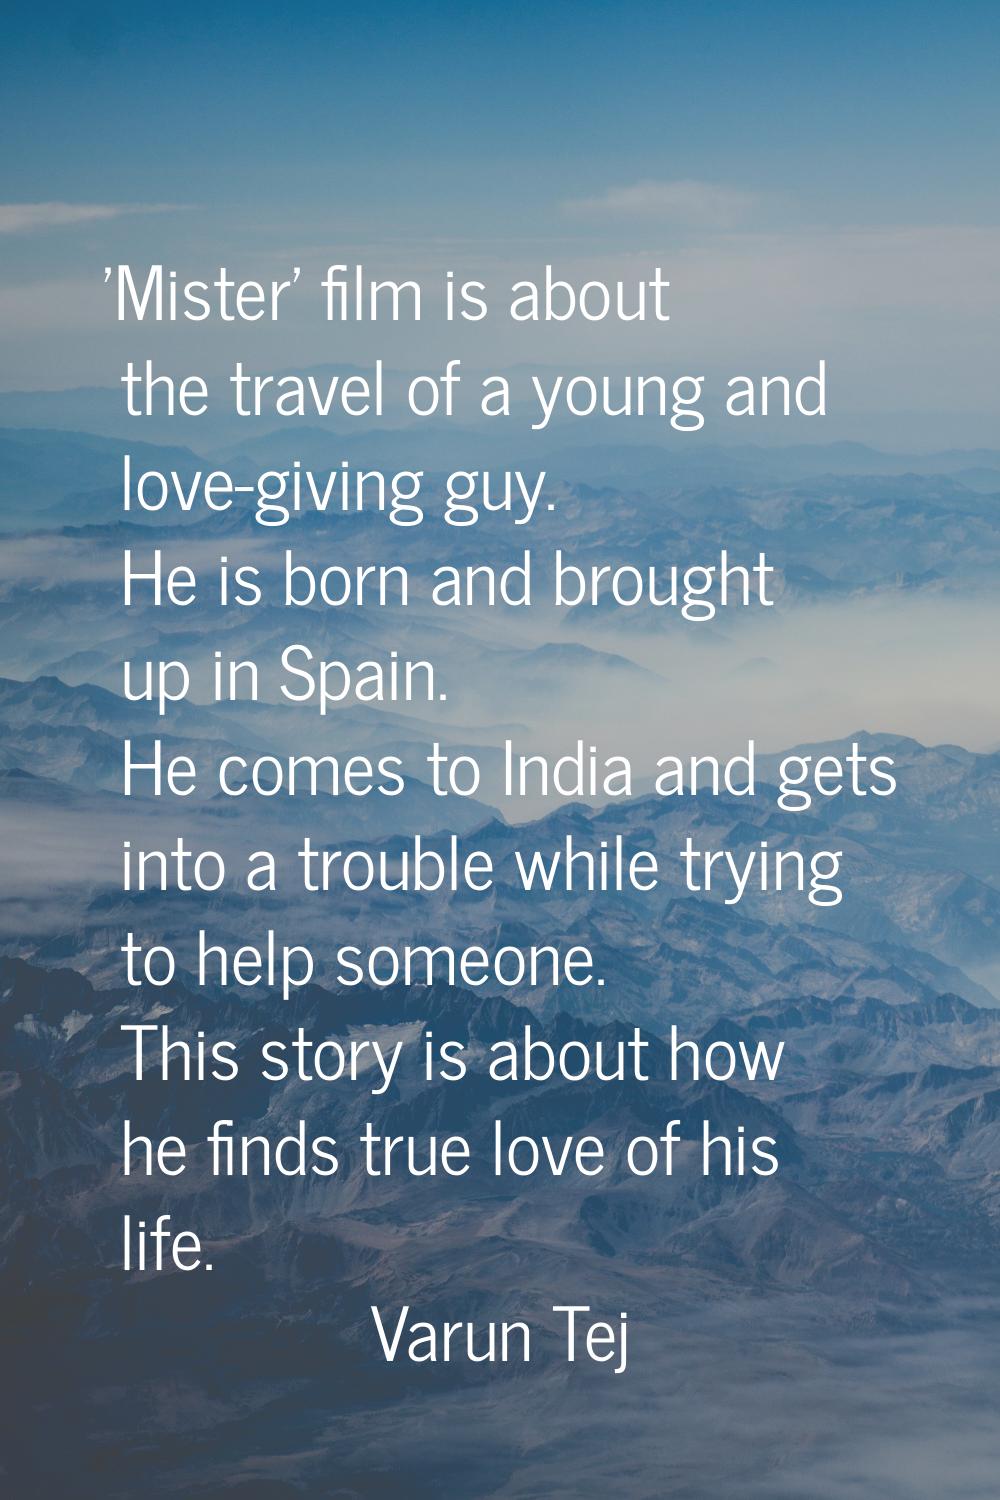 'Mister' film is about the travel of a young and love-giving guy. He is born and brought up in Spai